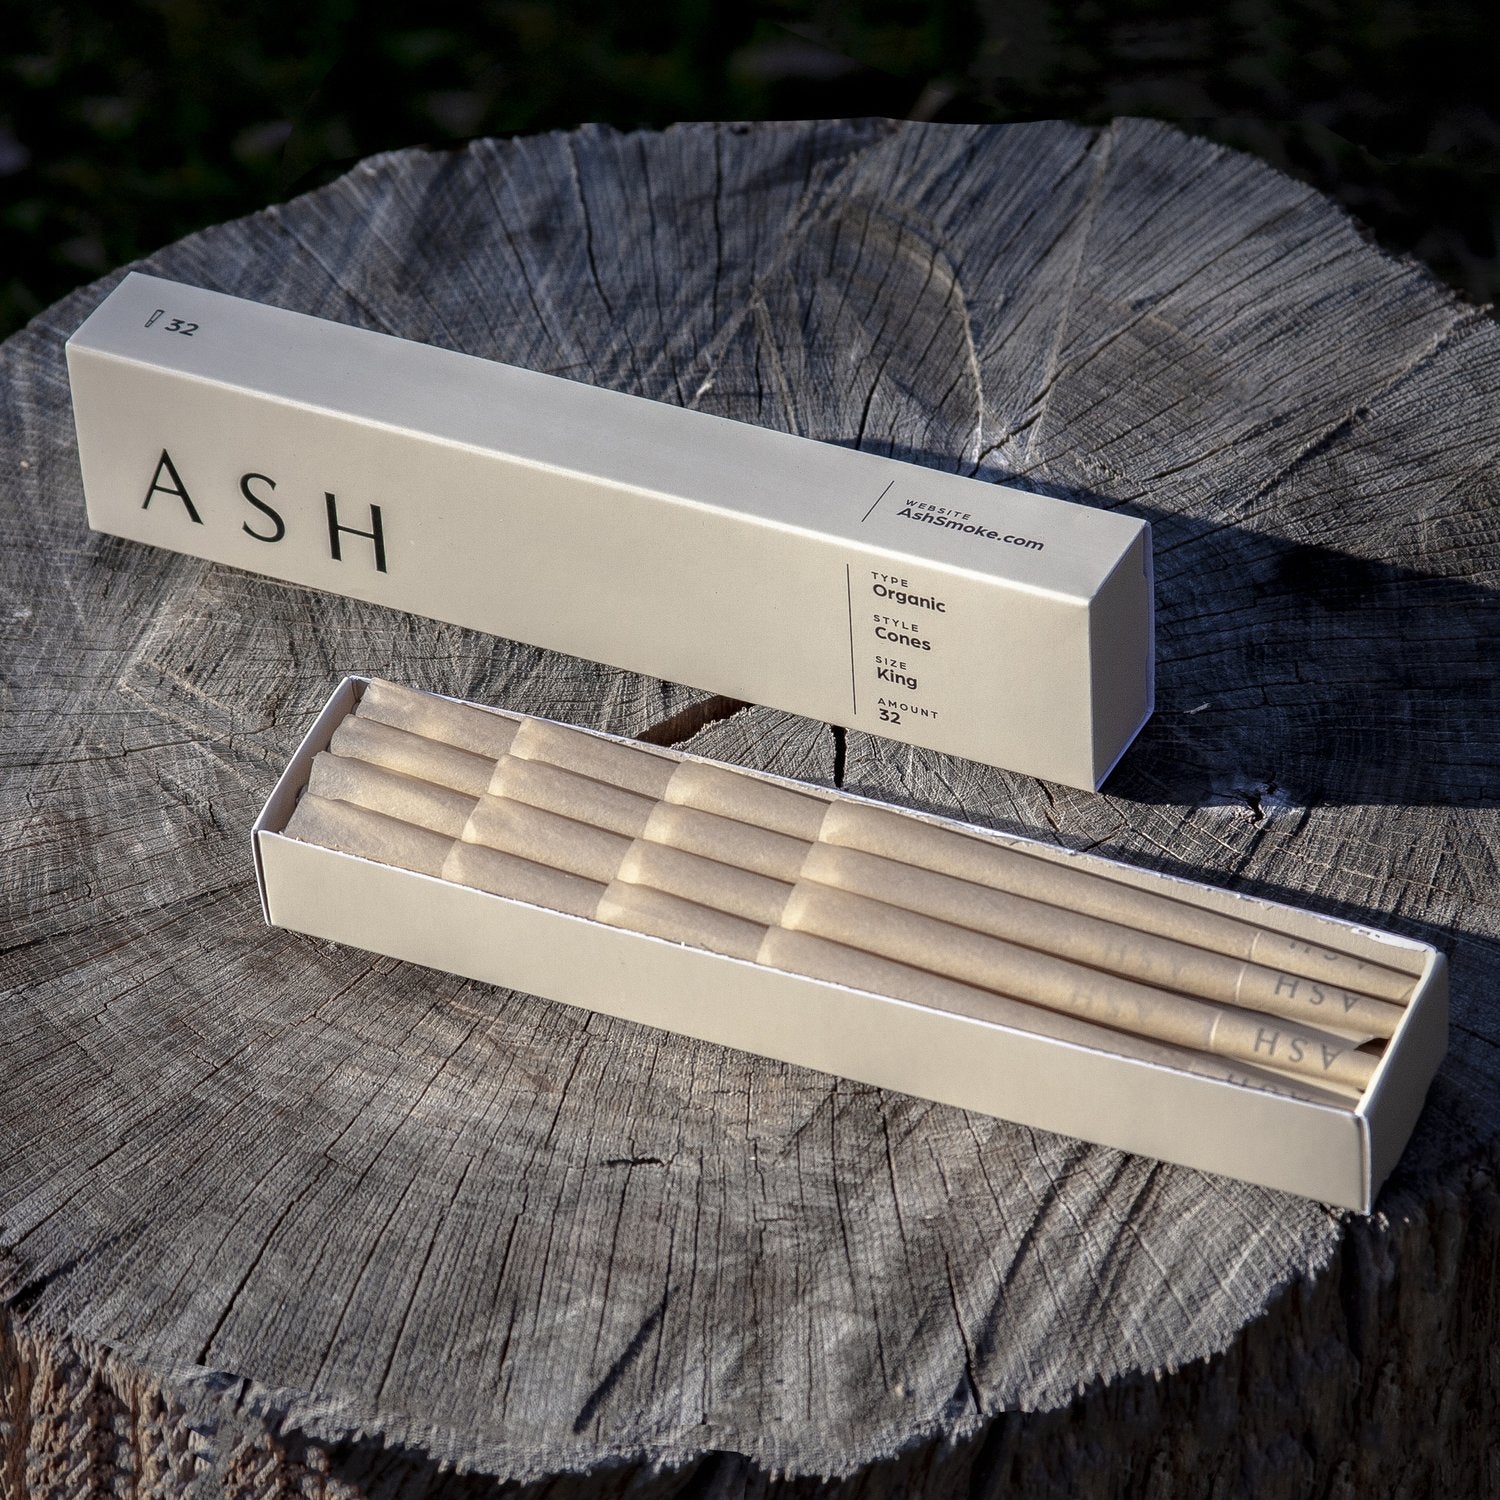  Pre-rolled Cones | Organic | 12 count by ASH ASH Perfumarie